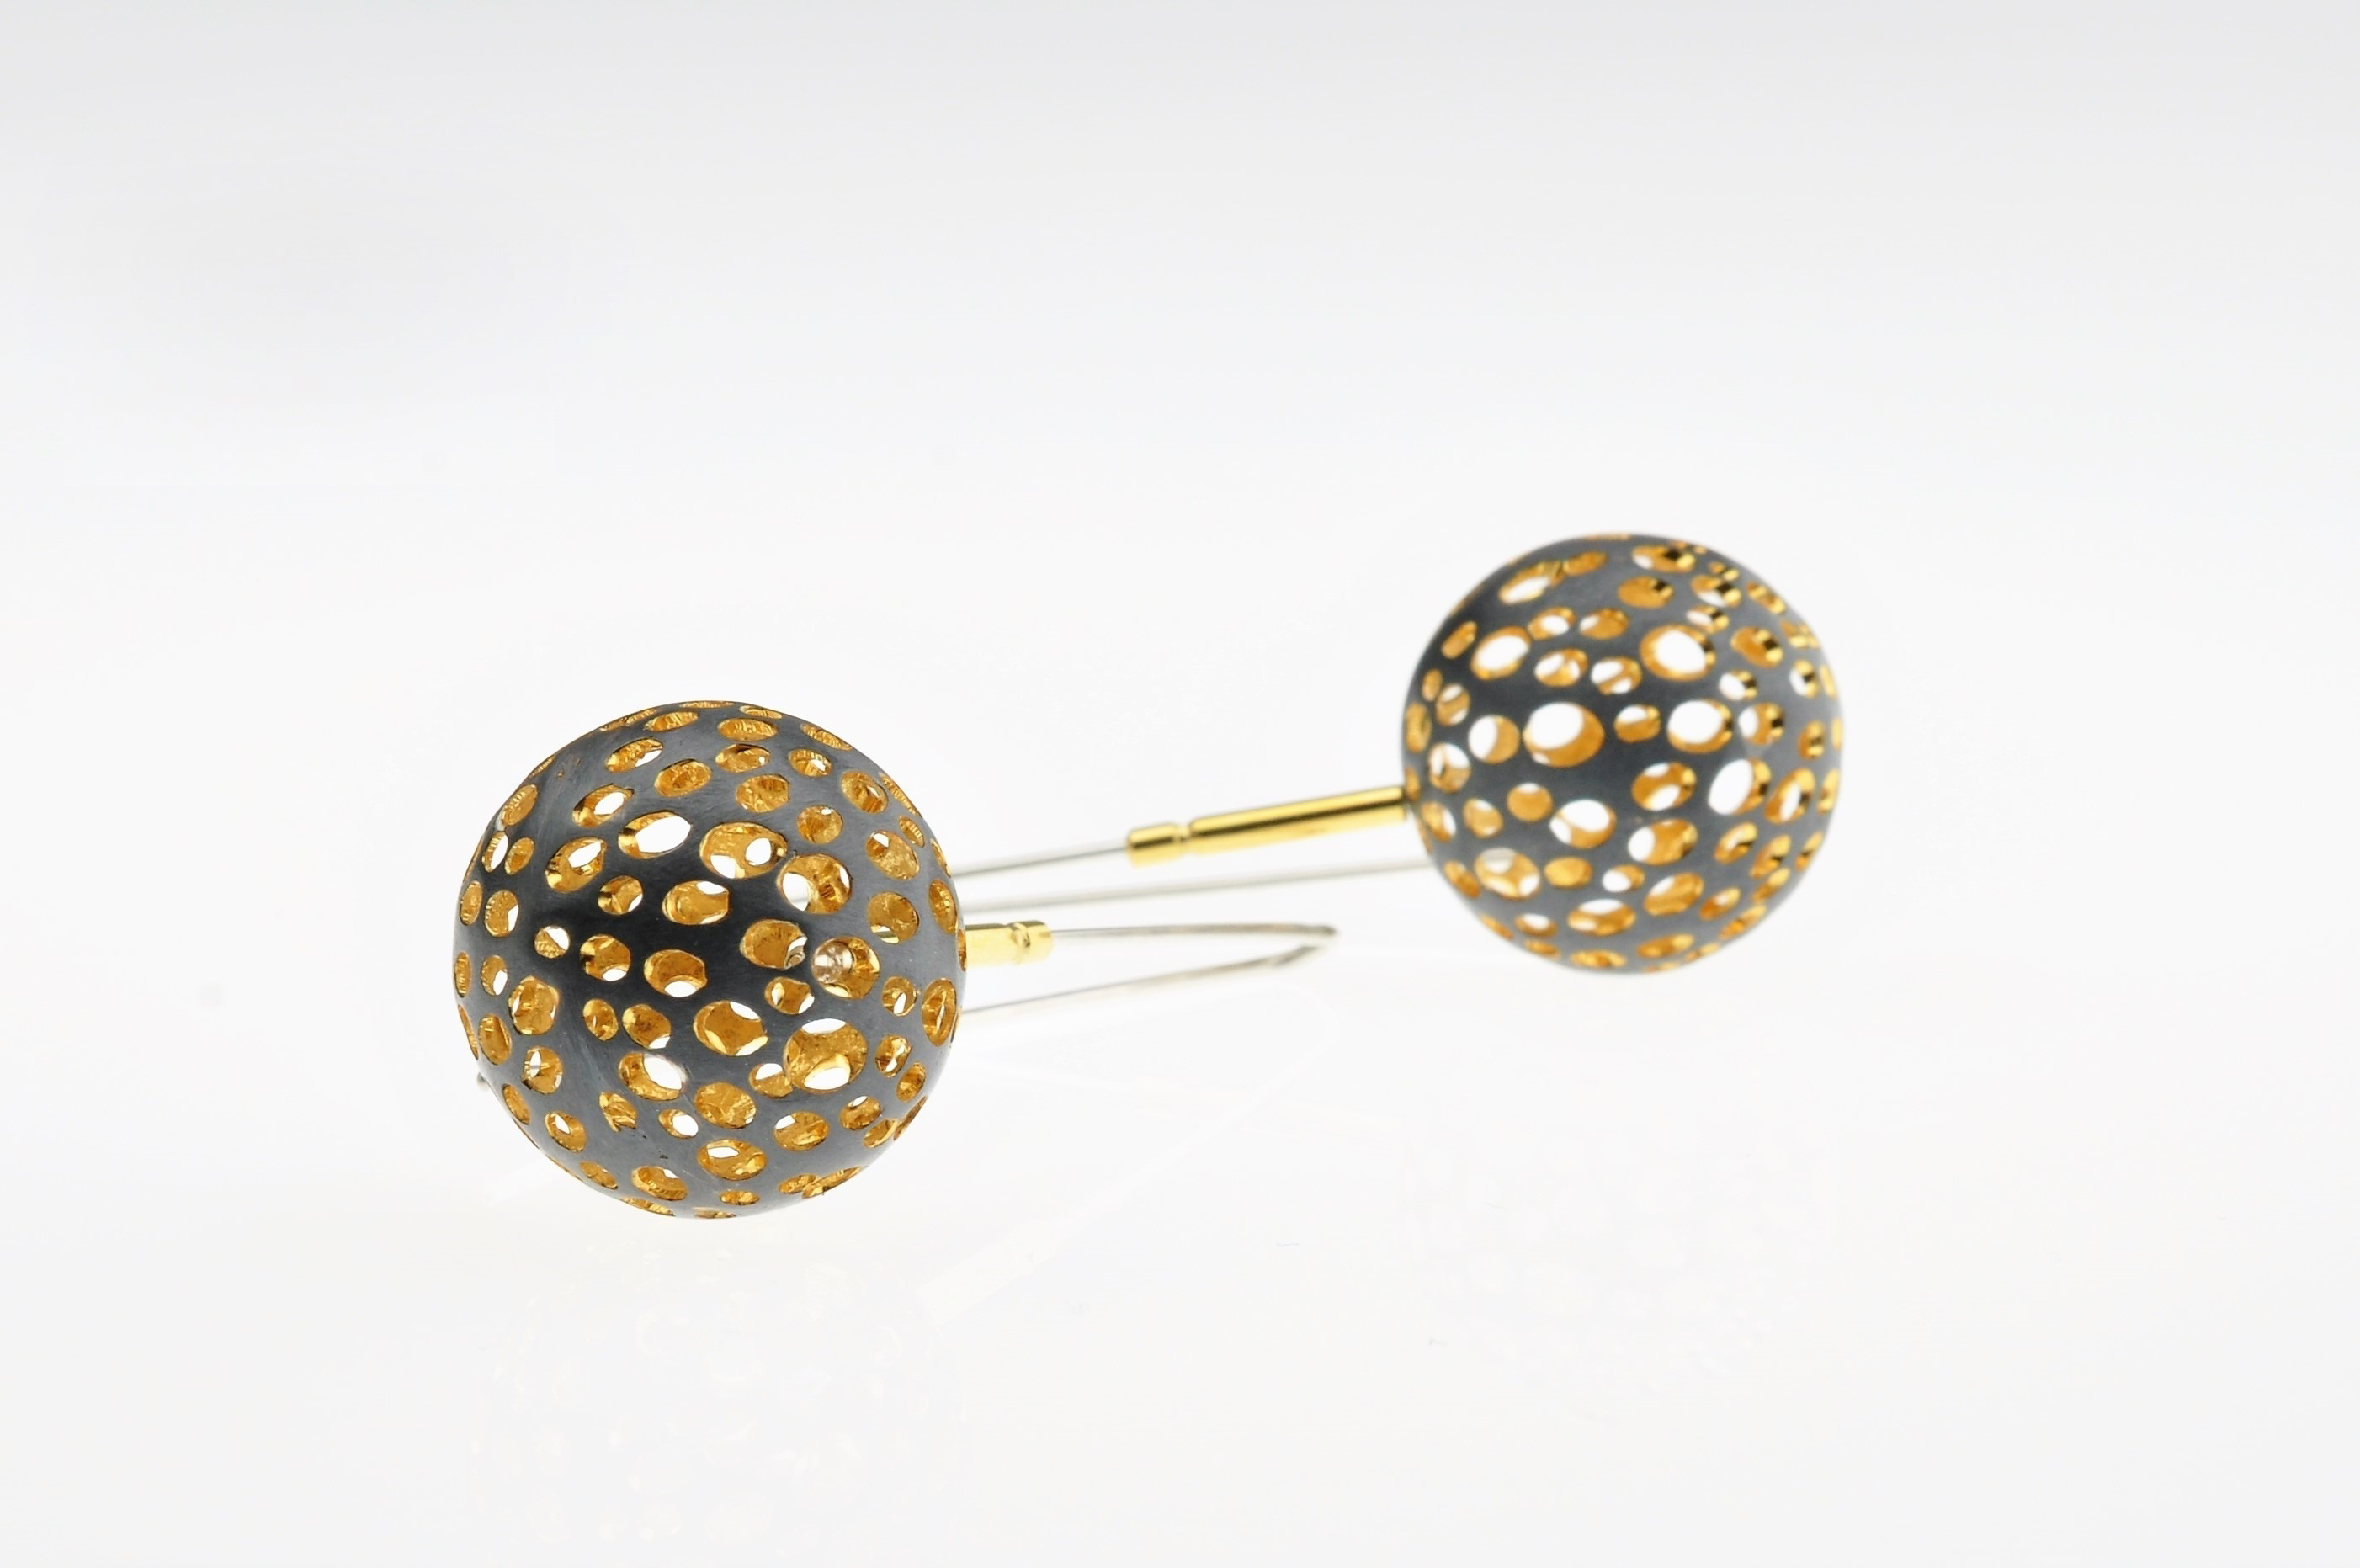 Oxidized Sterling Silver Round Drop Earrings with Gold Vermeil - BAS55d